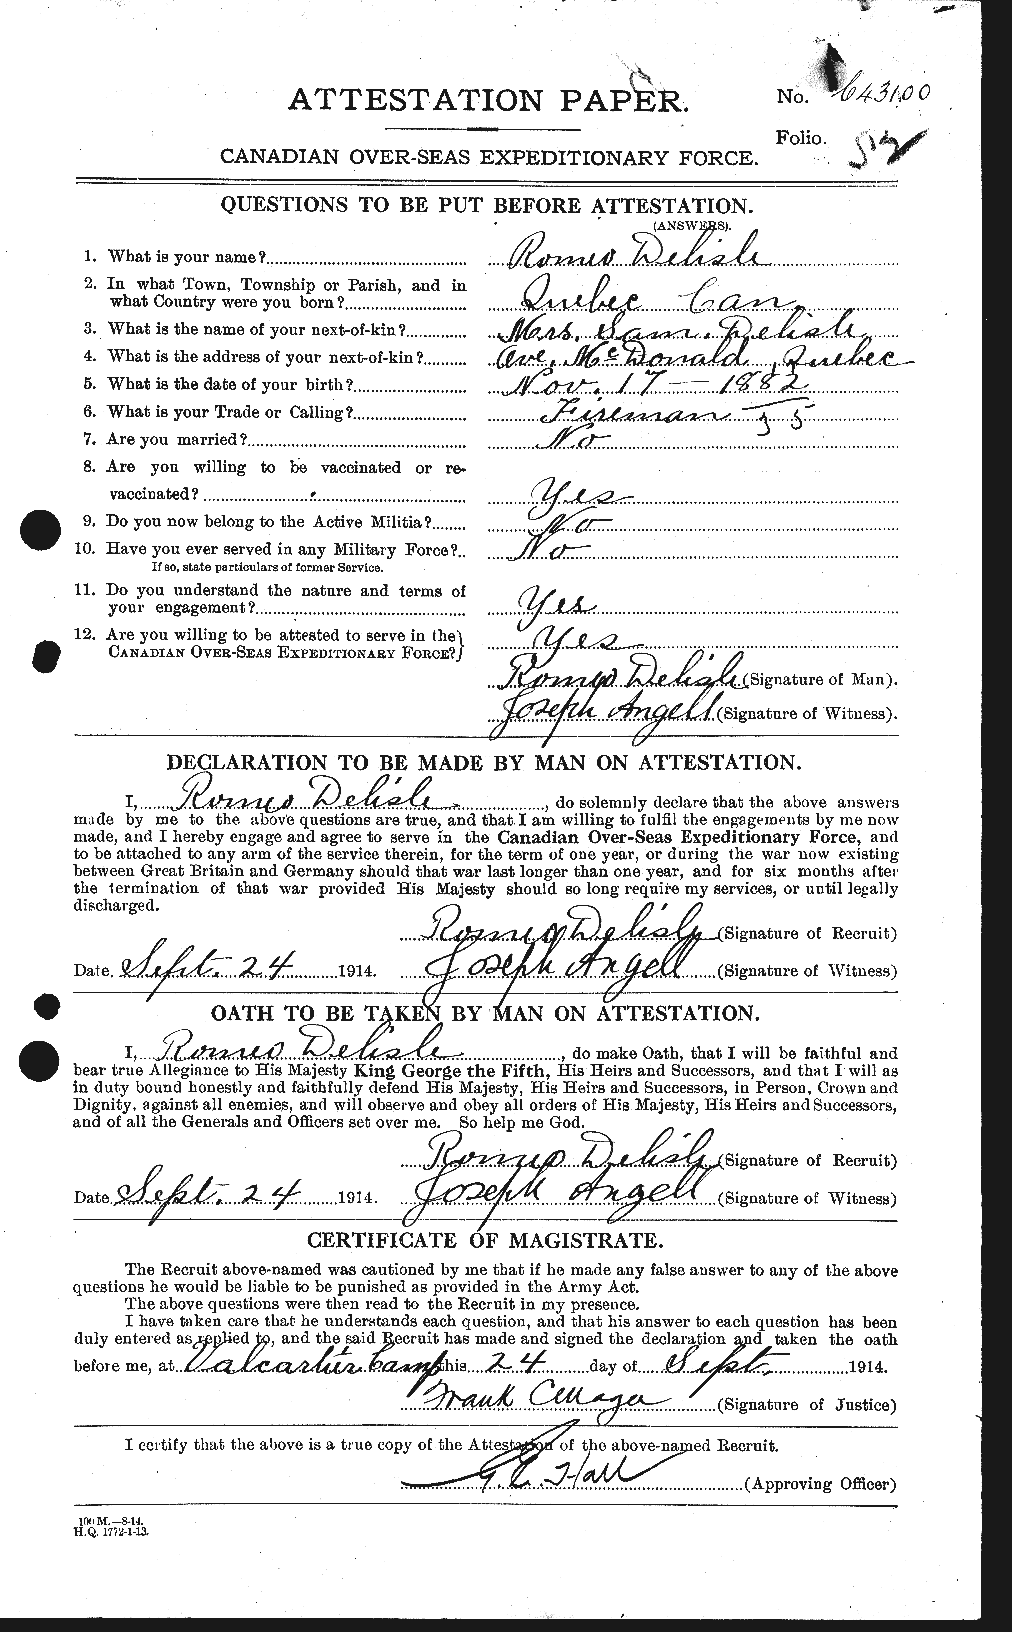 Personnel Records of the First World War - CEF 286643a